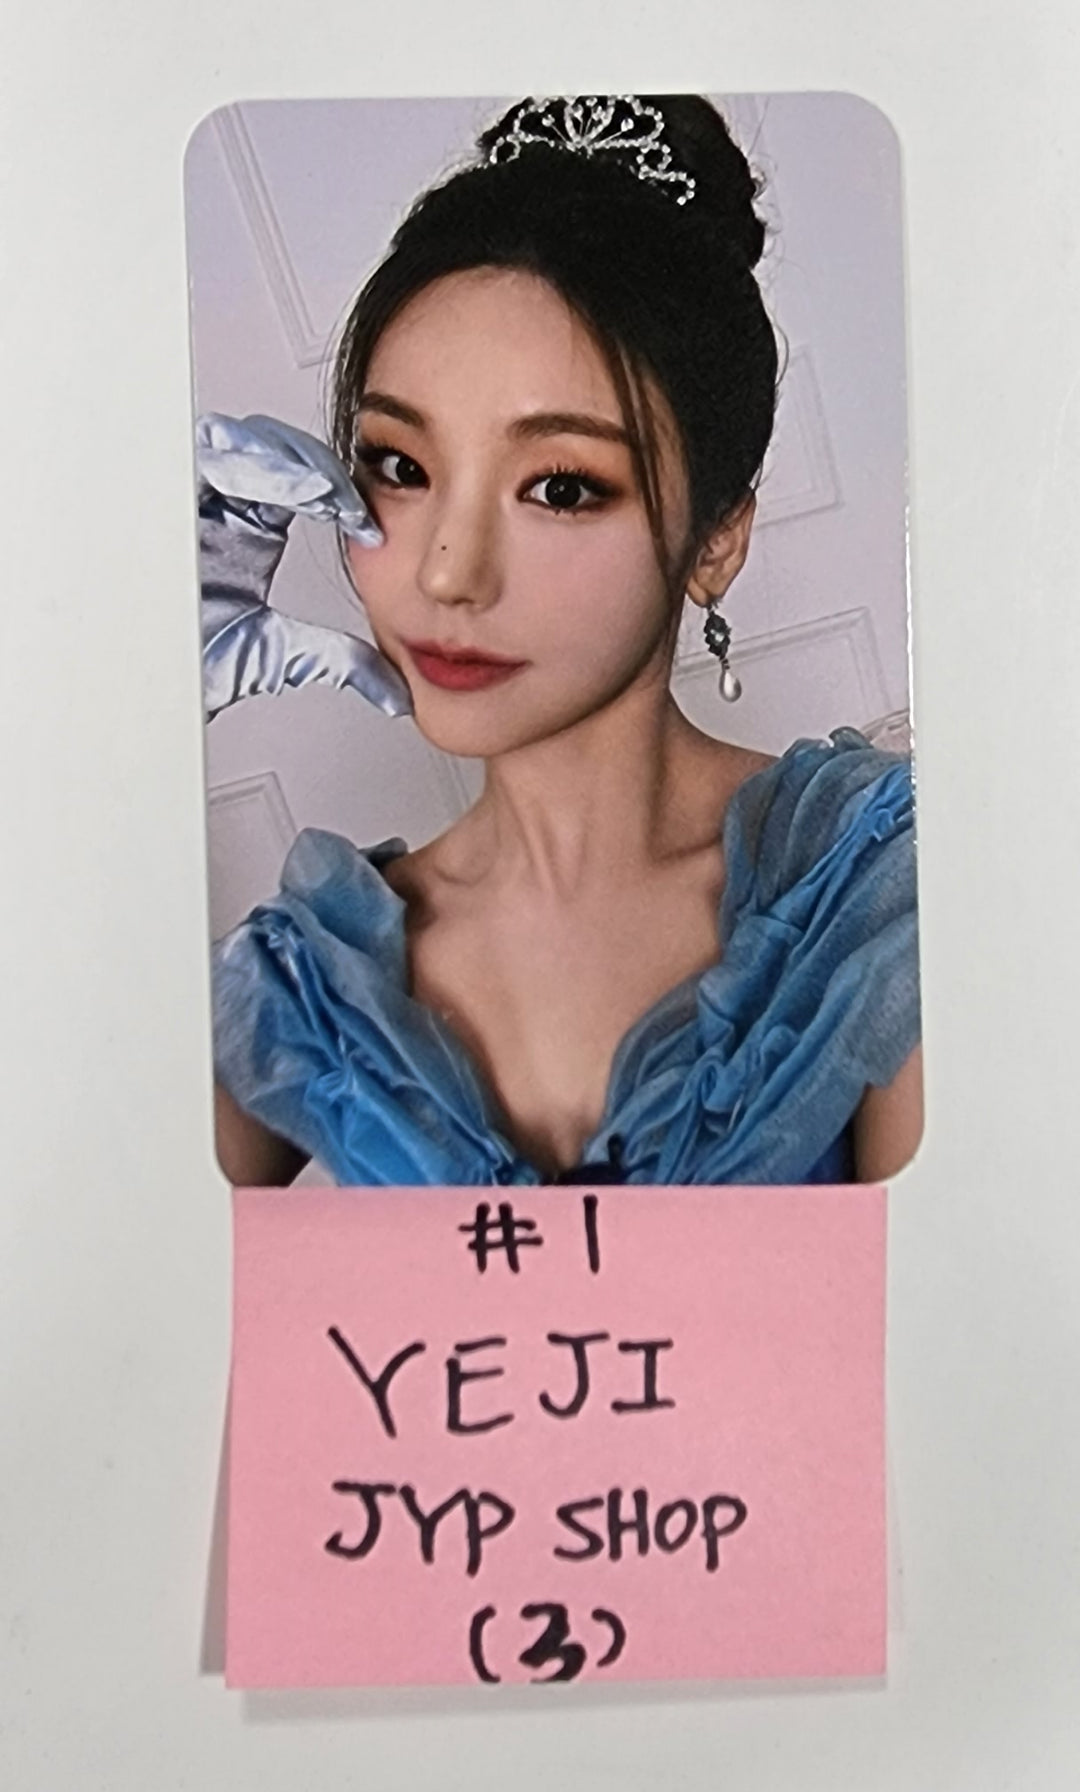 ITZY "Wonder World" The 2nd Fan Meeting  - Jyp Shop MD Event Photocard